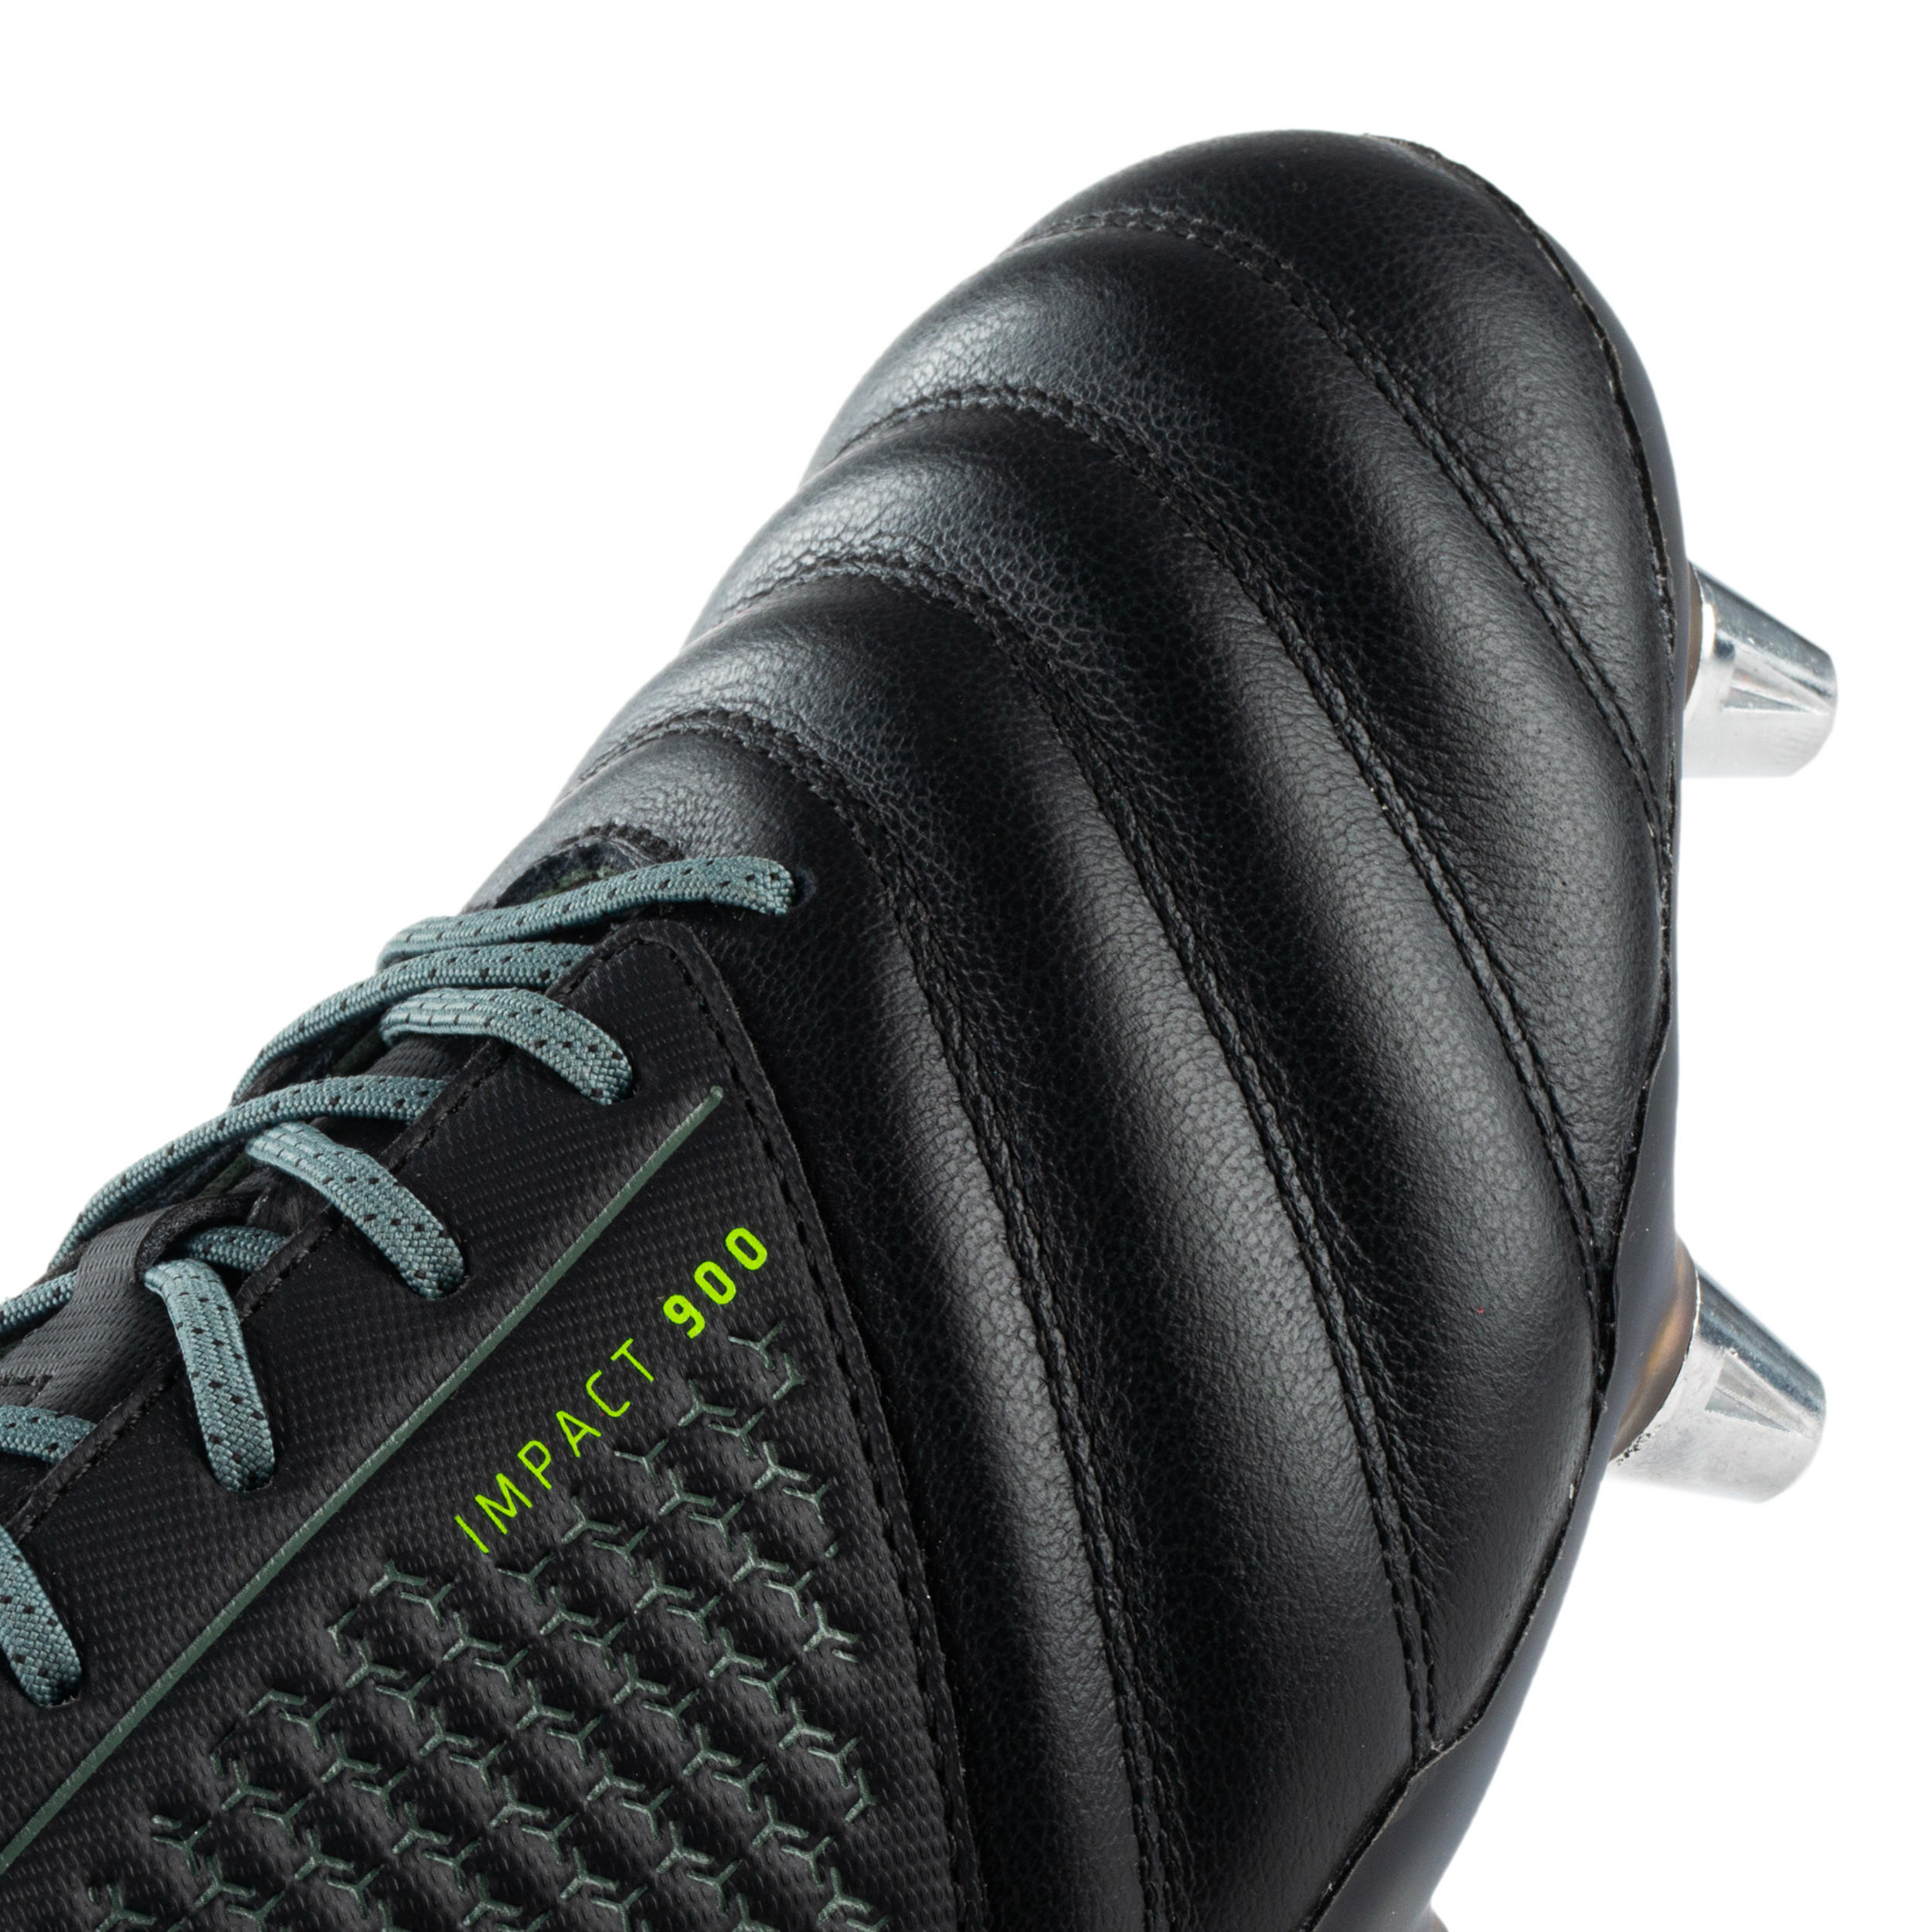 Adult Soft Ground Screw-In Rugby Boots Impact R900 SG 8 Studs - Black 13/15